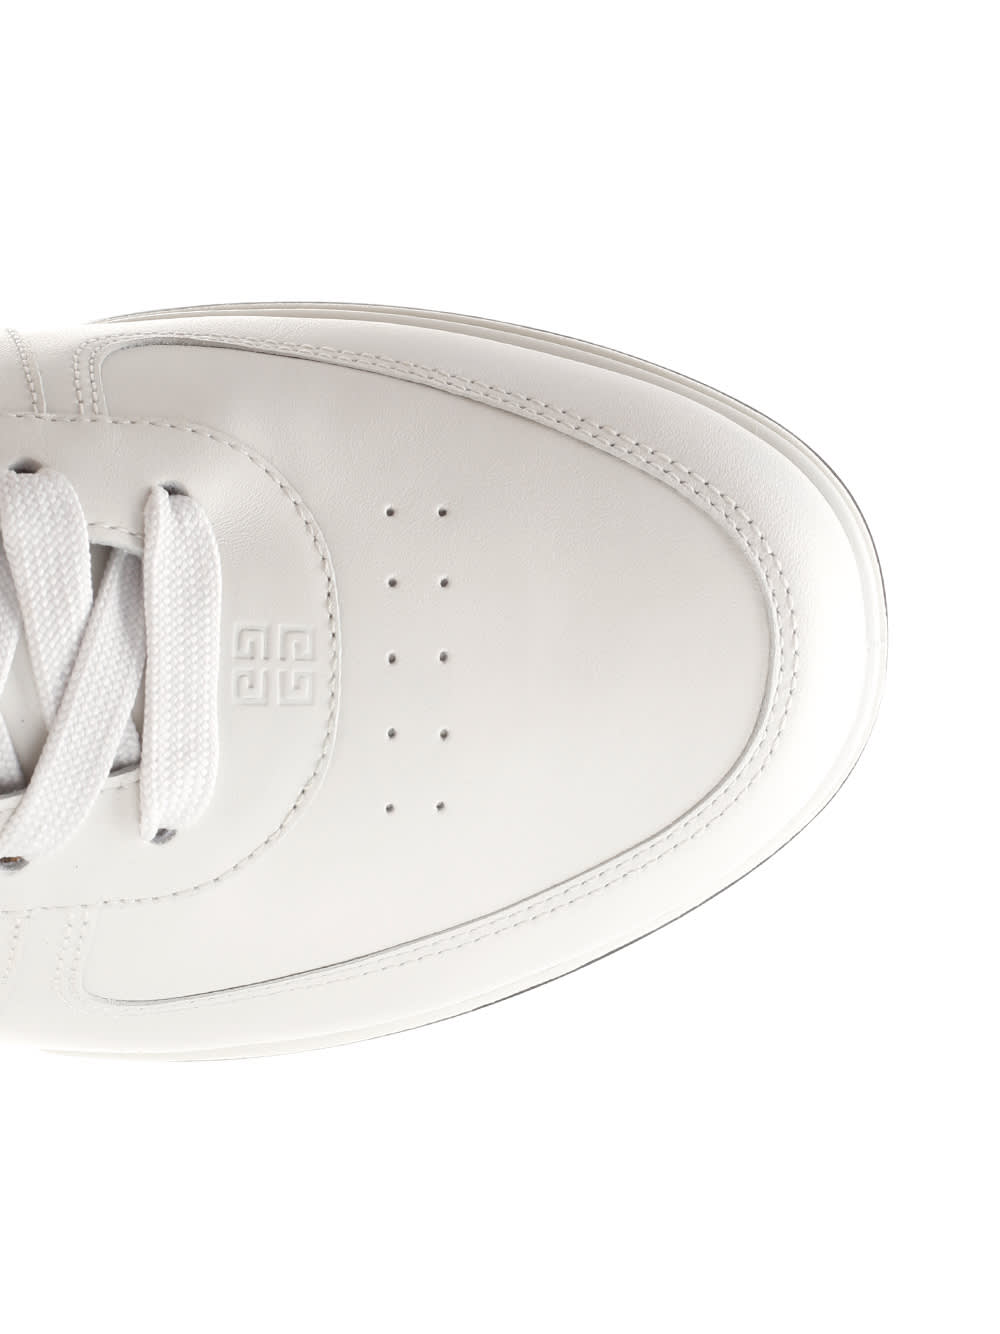 Shop Givenchy White/black G4 Sneakers